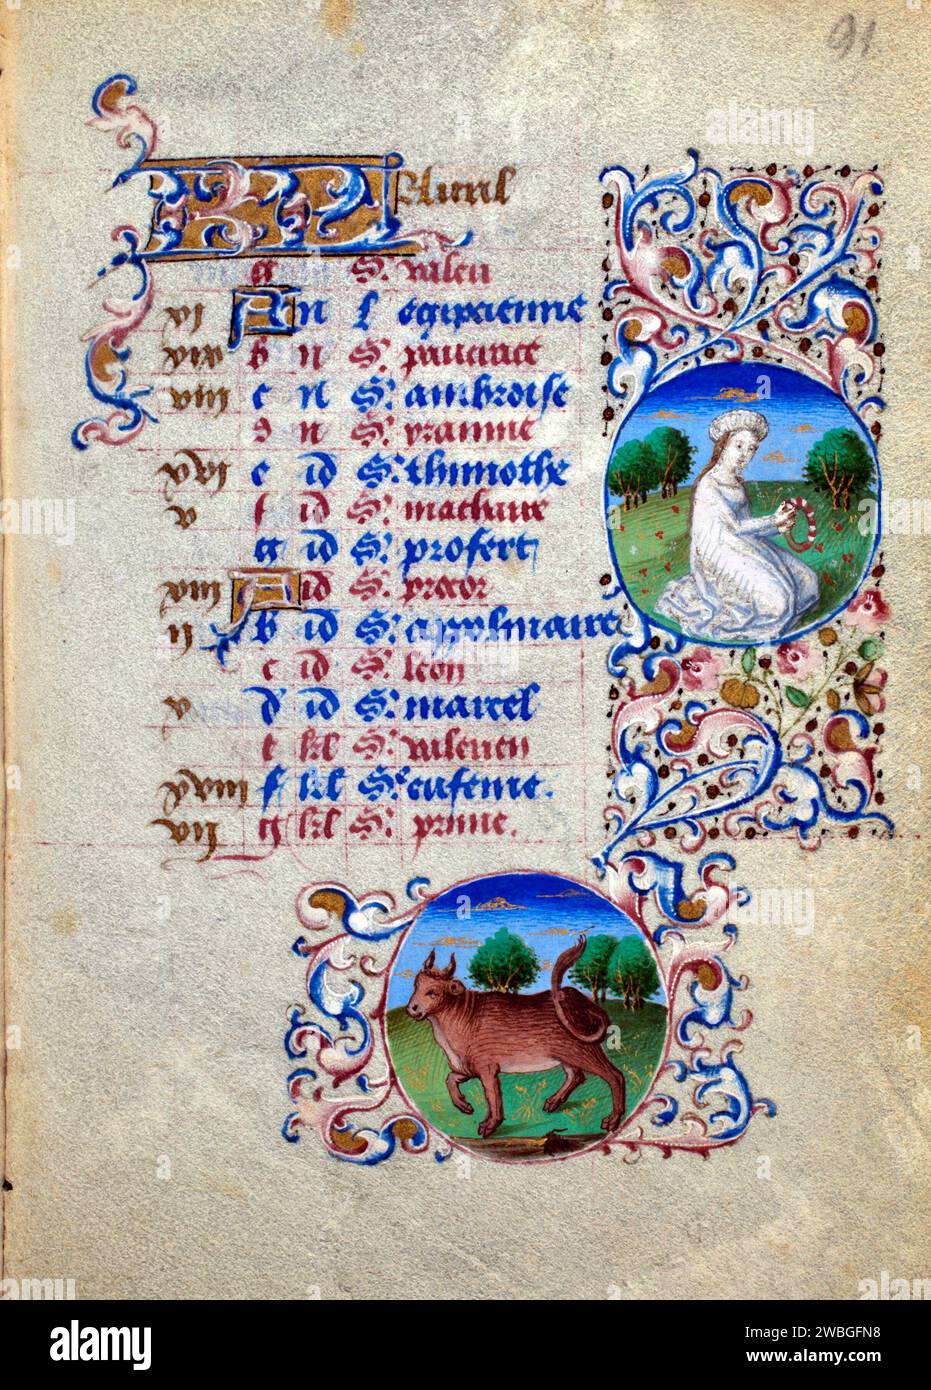 Exquisite illuminated pages from the 1455 Book of Hours of Simon de Varie, who was a wealthy court official.  Each page is hand painted, often by reknown artists. These books were extremely expensive and were prized possessions of the very wealthy.  This page shows a calendar for the month of April. This was painted by Master of Jean Rolin II. Stock Photo